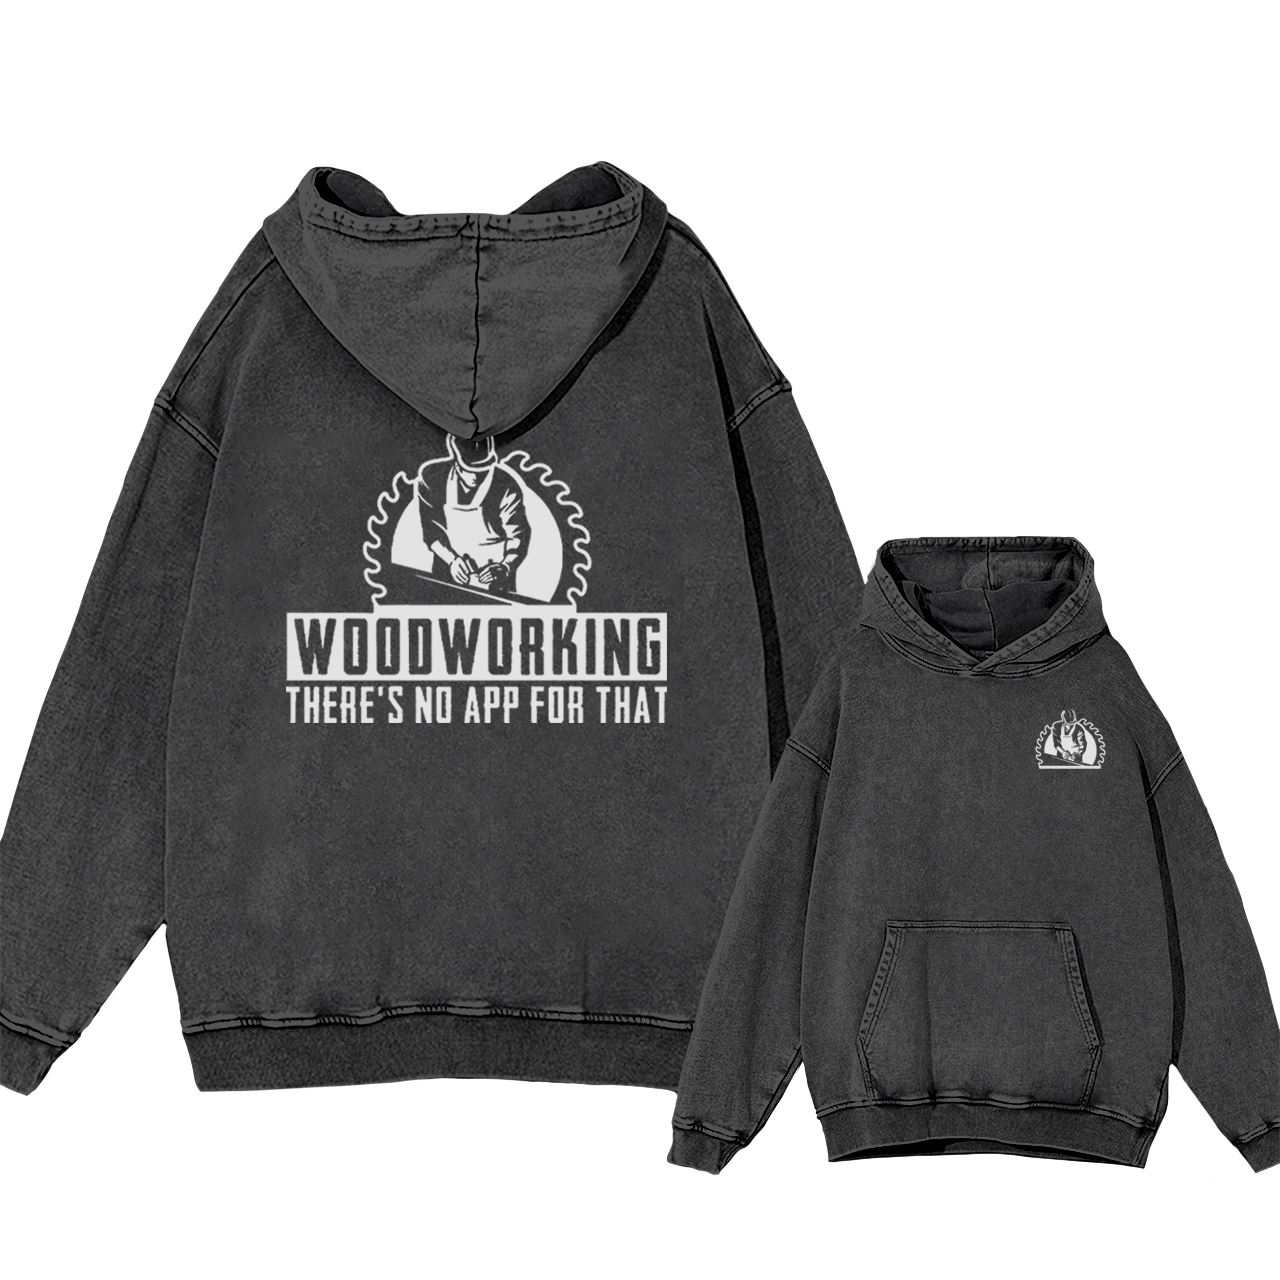 Woodworking There's No App forThat Garment-Dye Hoodies